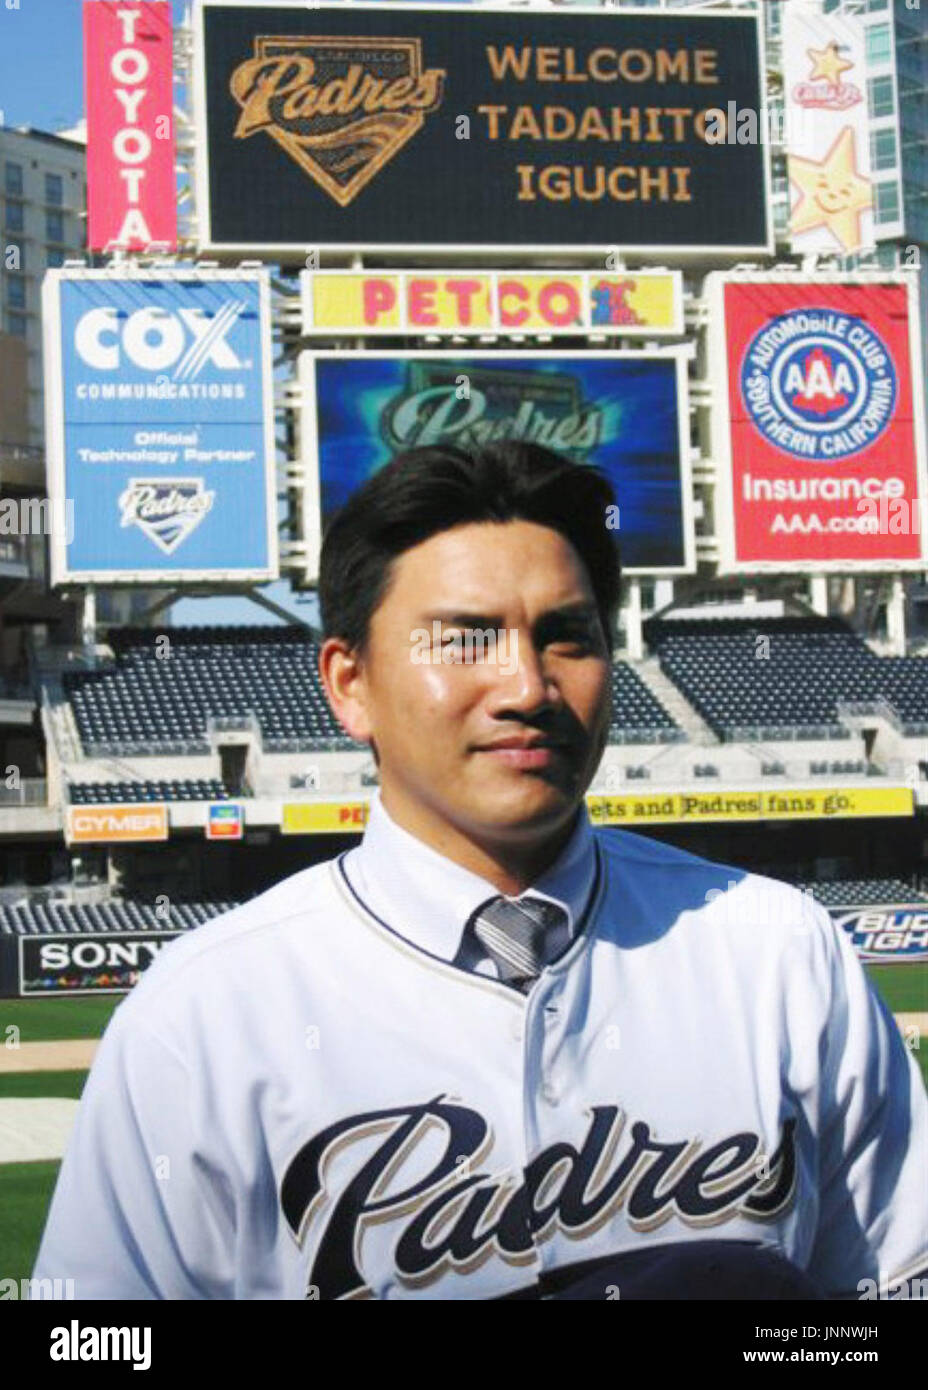 SAN DIEGO, United States - Tadahito Iguchi poses for photographers in his  new San Diago Padres uniform after he signed a one-year deal with the  Padres on Dec. 18. The 33-year-old infielder